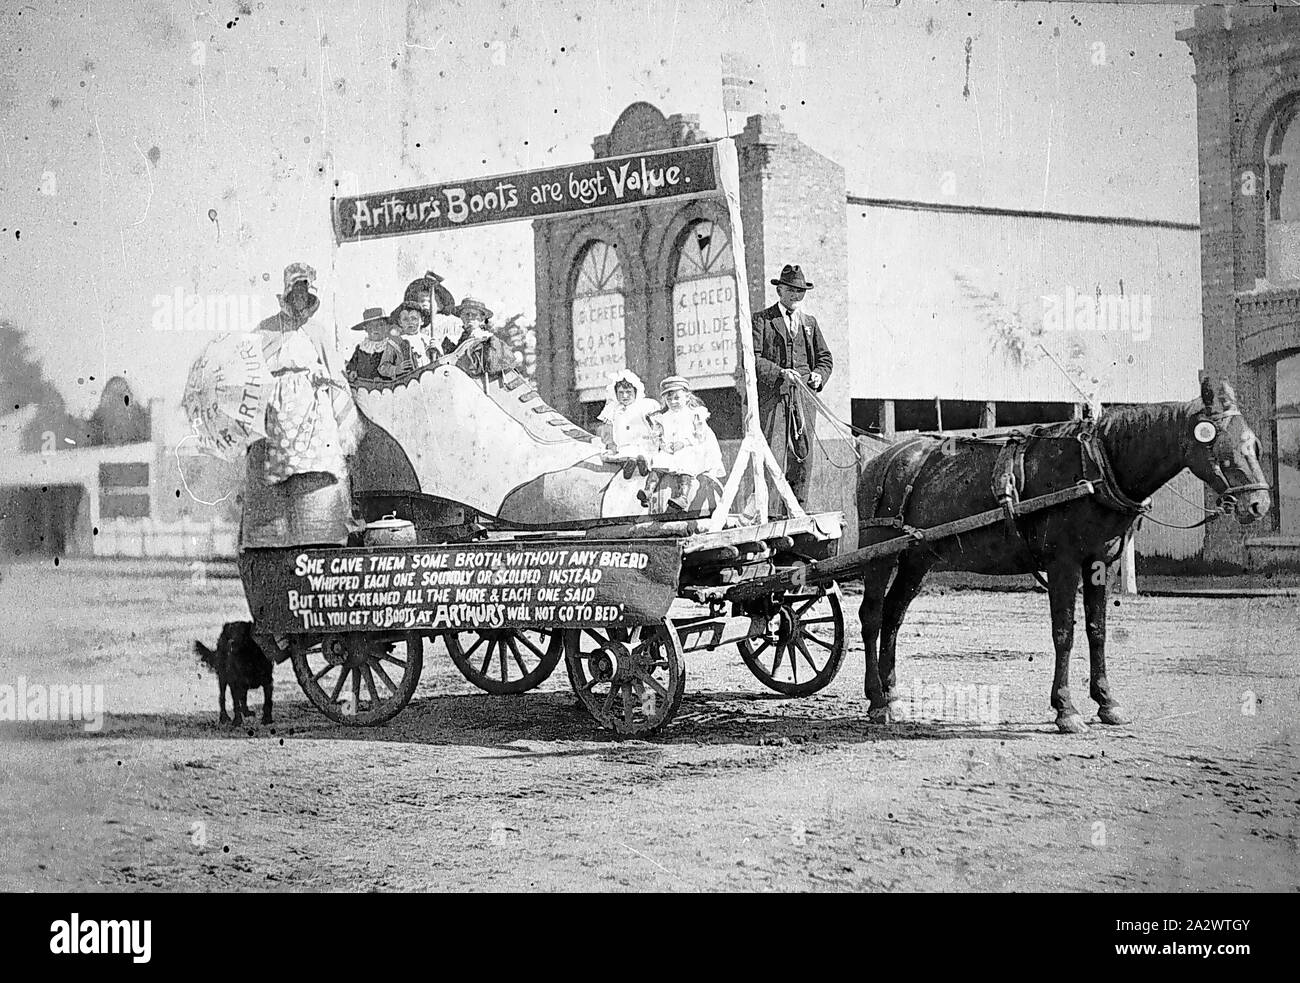 Negative - Bairnsdale, Victoria, circa 1900, A horse float in a carnival procession. The theme of the float is 'The old woman who lived in a shoe' and a sign on the side reads: She gave them some broth without any bread/ whipped each one soundly or scolded instead/ but they yelled all the more and each one said/ 'till you get us boots at Arthur's we'll not go to bed. A sign above the float reads: Arthur's boots are best value Stock Photo